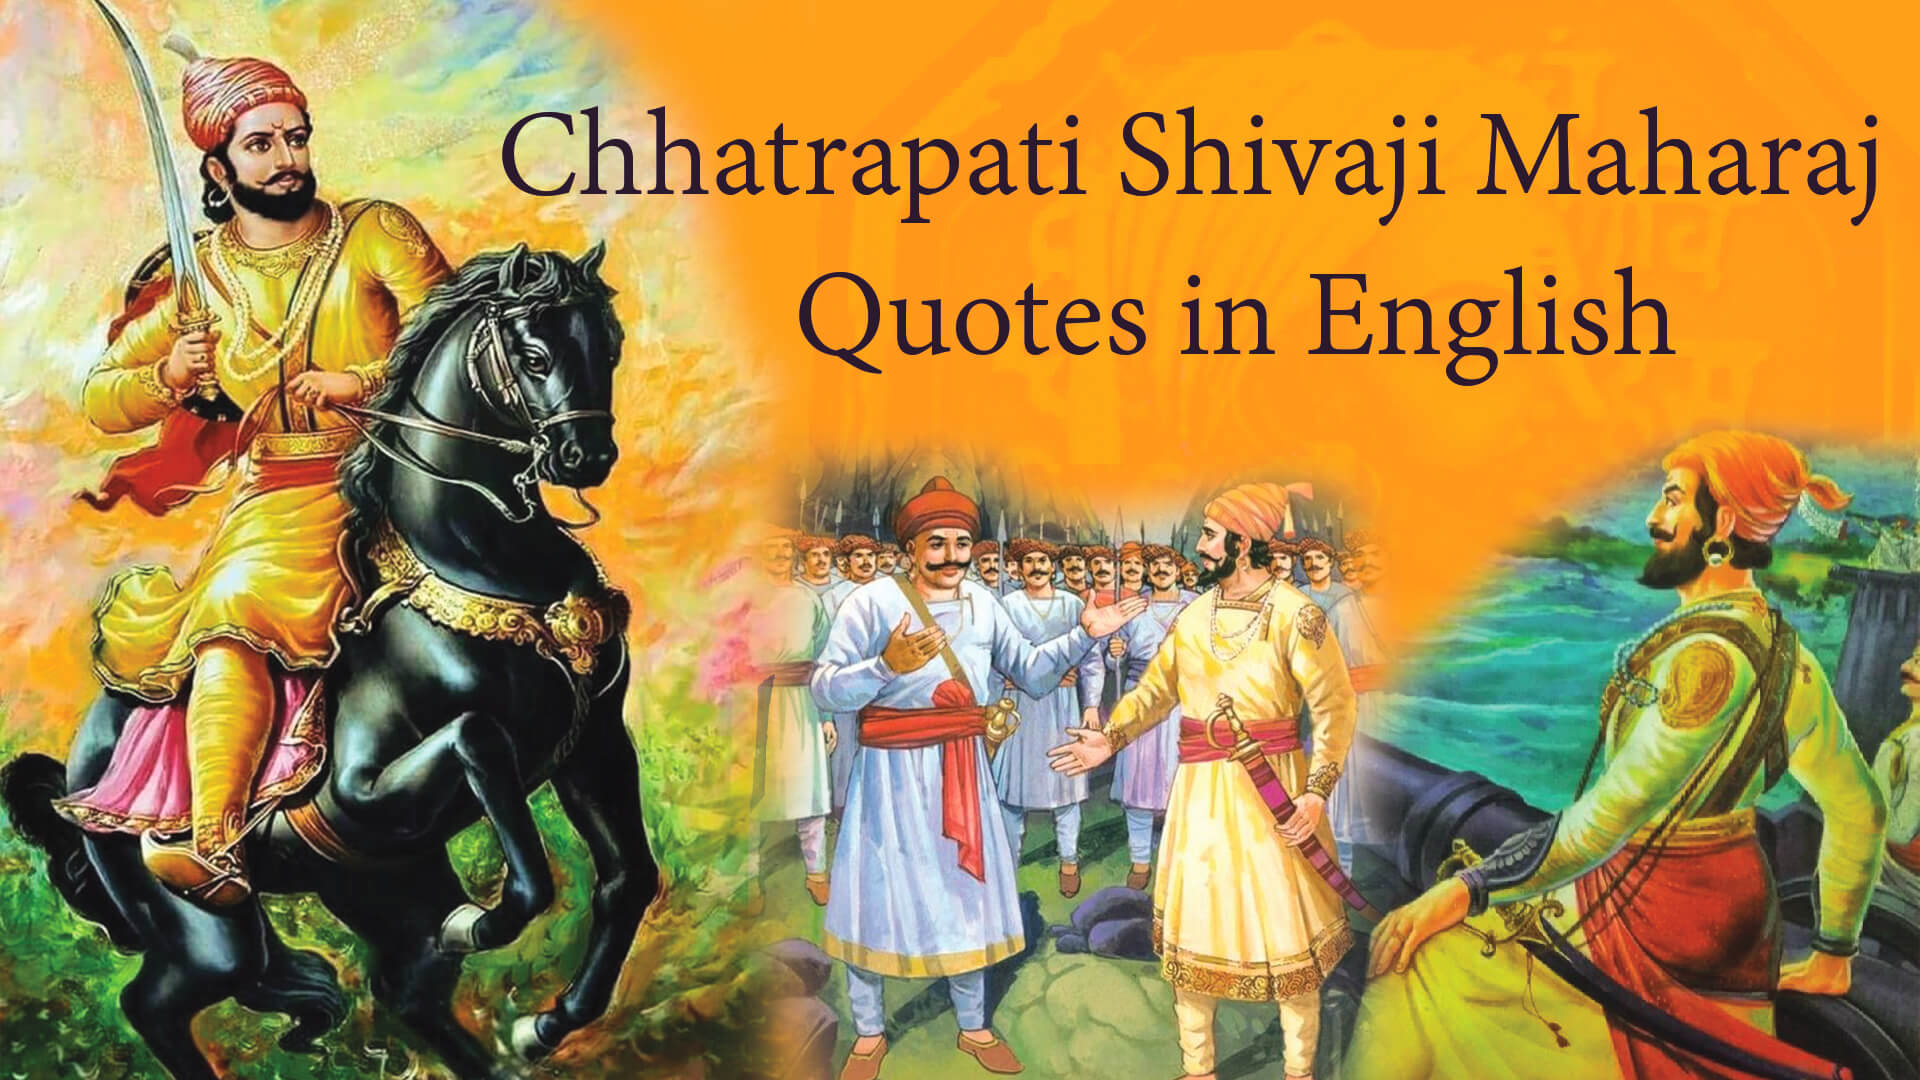 You are currently viewing 15+ Chhatrapati Shivaji Maharaj Quotes in English